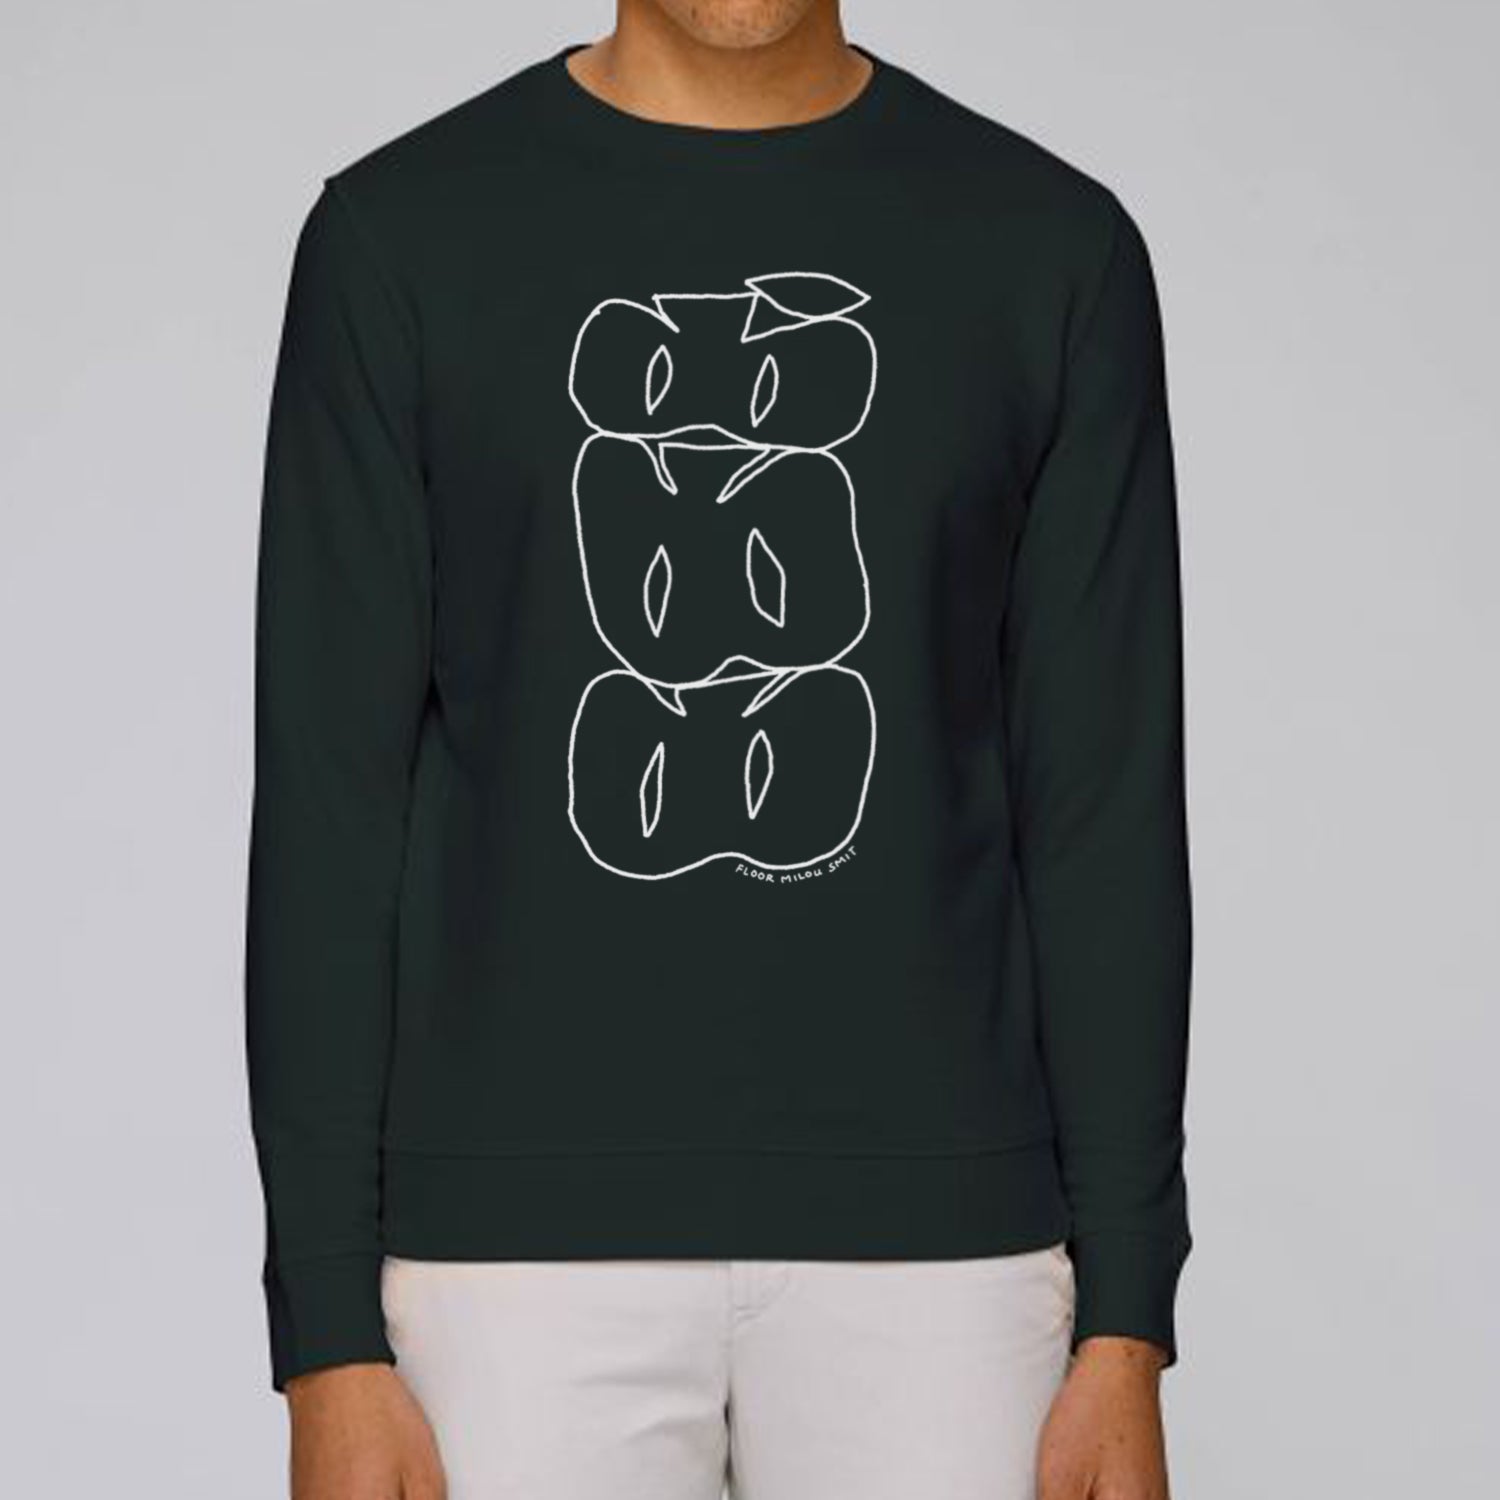 Photo of a model wearing a black sweater. The print on the sweater is a white line art drawing of 3 cut apples on top of each other forming a stack.